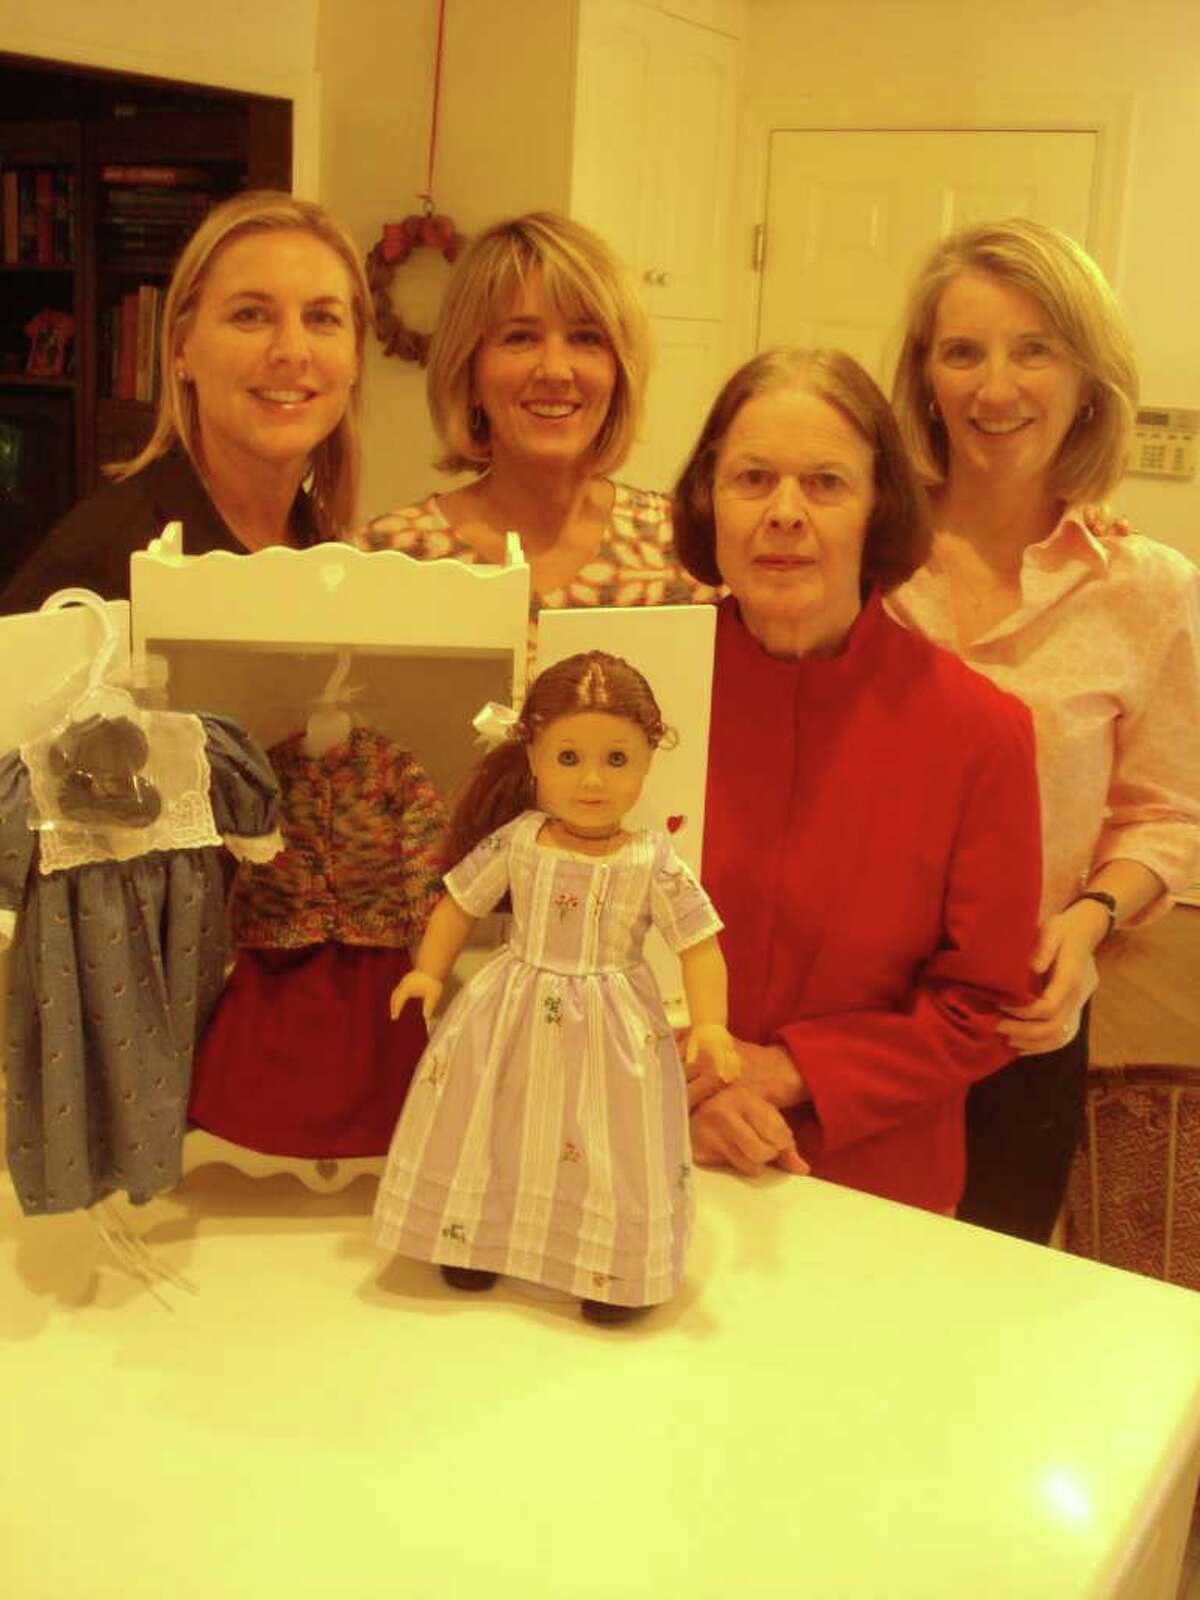 Getabout Fall Fundraiser Committee members back row, from left, Katherine Ong, Rene Kemp and Robin Busch admire the American Girl hand-sewn doll package auction item, contributed by fellow committee member Ruth Witt (front). Getabout's annual fundraiser and silent auction is scheduled for Sunday, Oct. 16 at New Canaan Country Club.